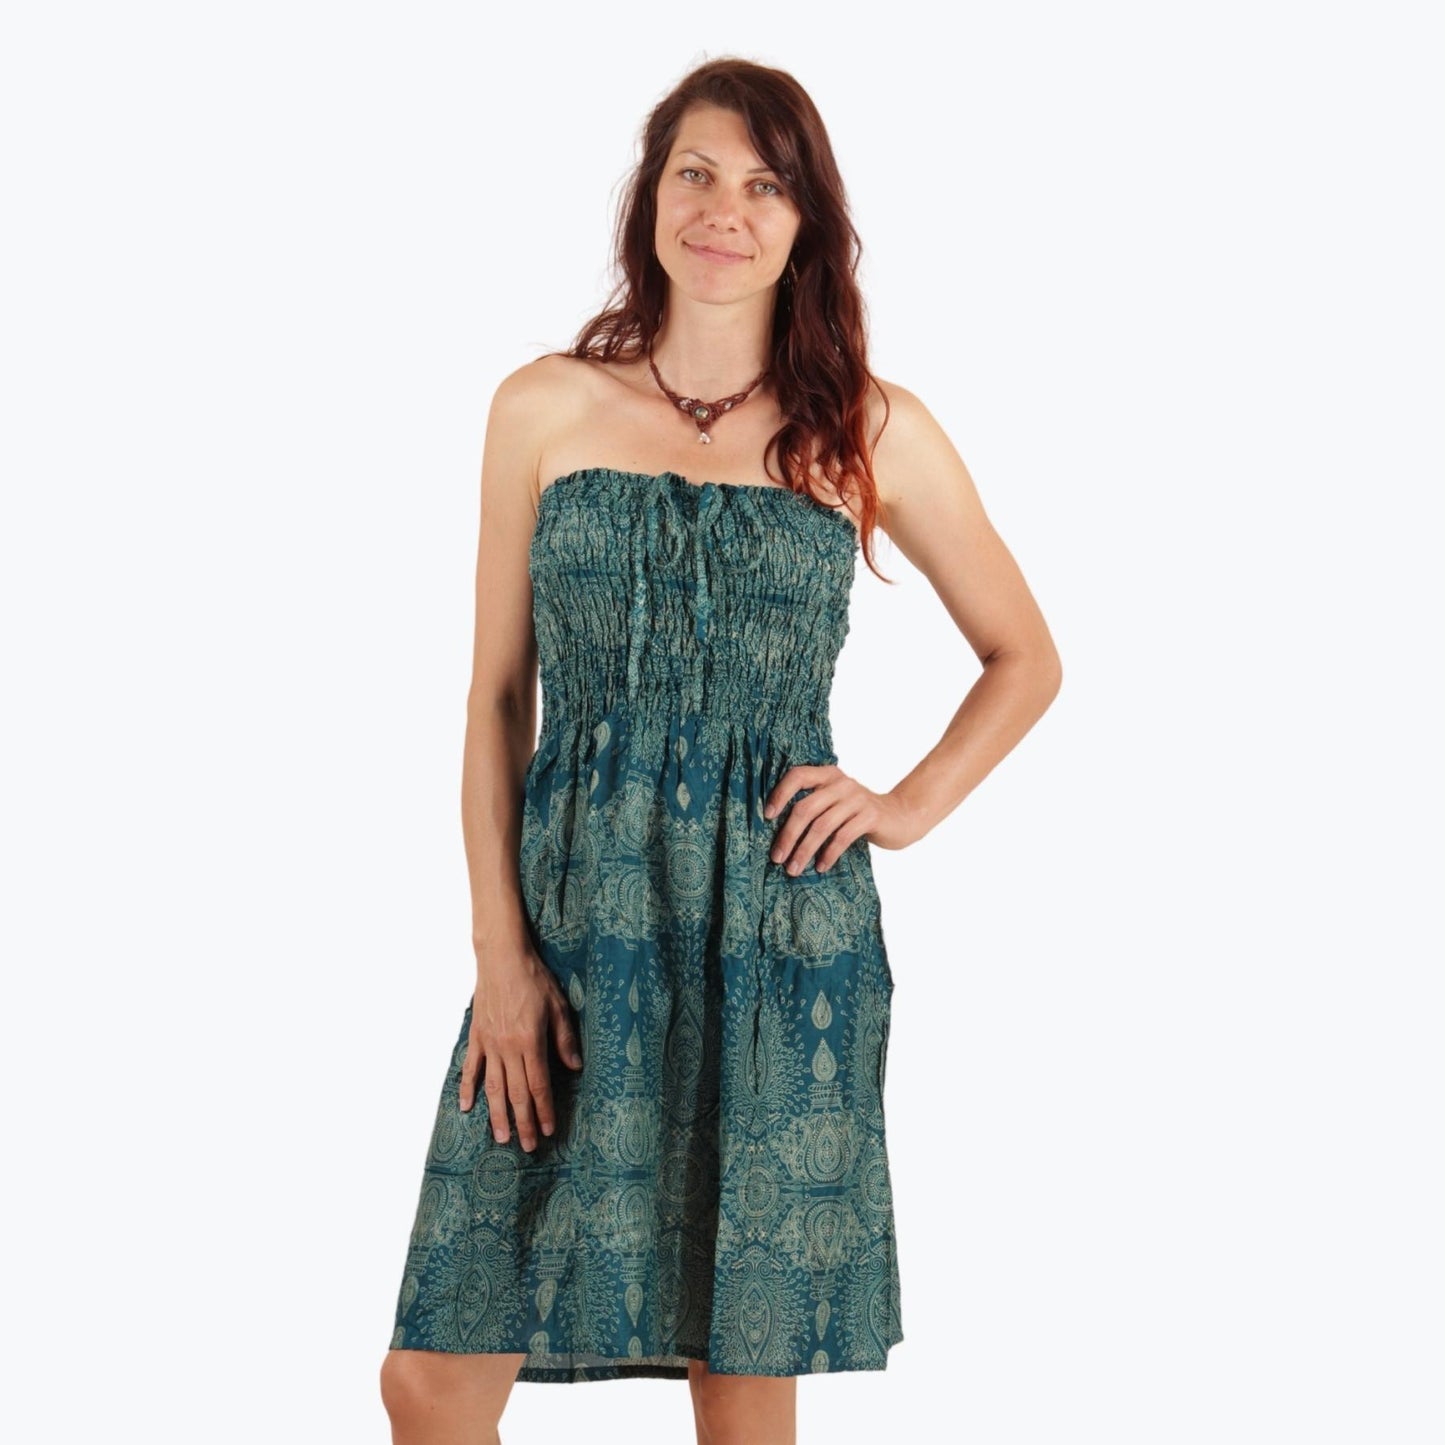 Freely dress - Turquoise